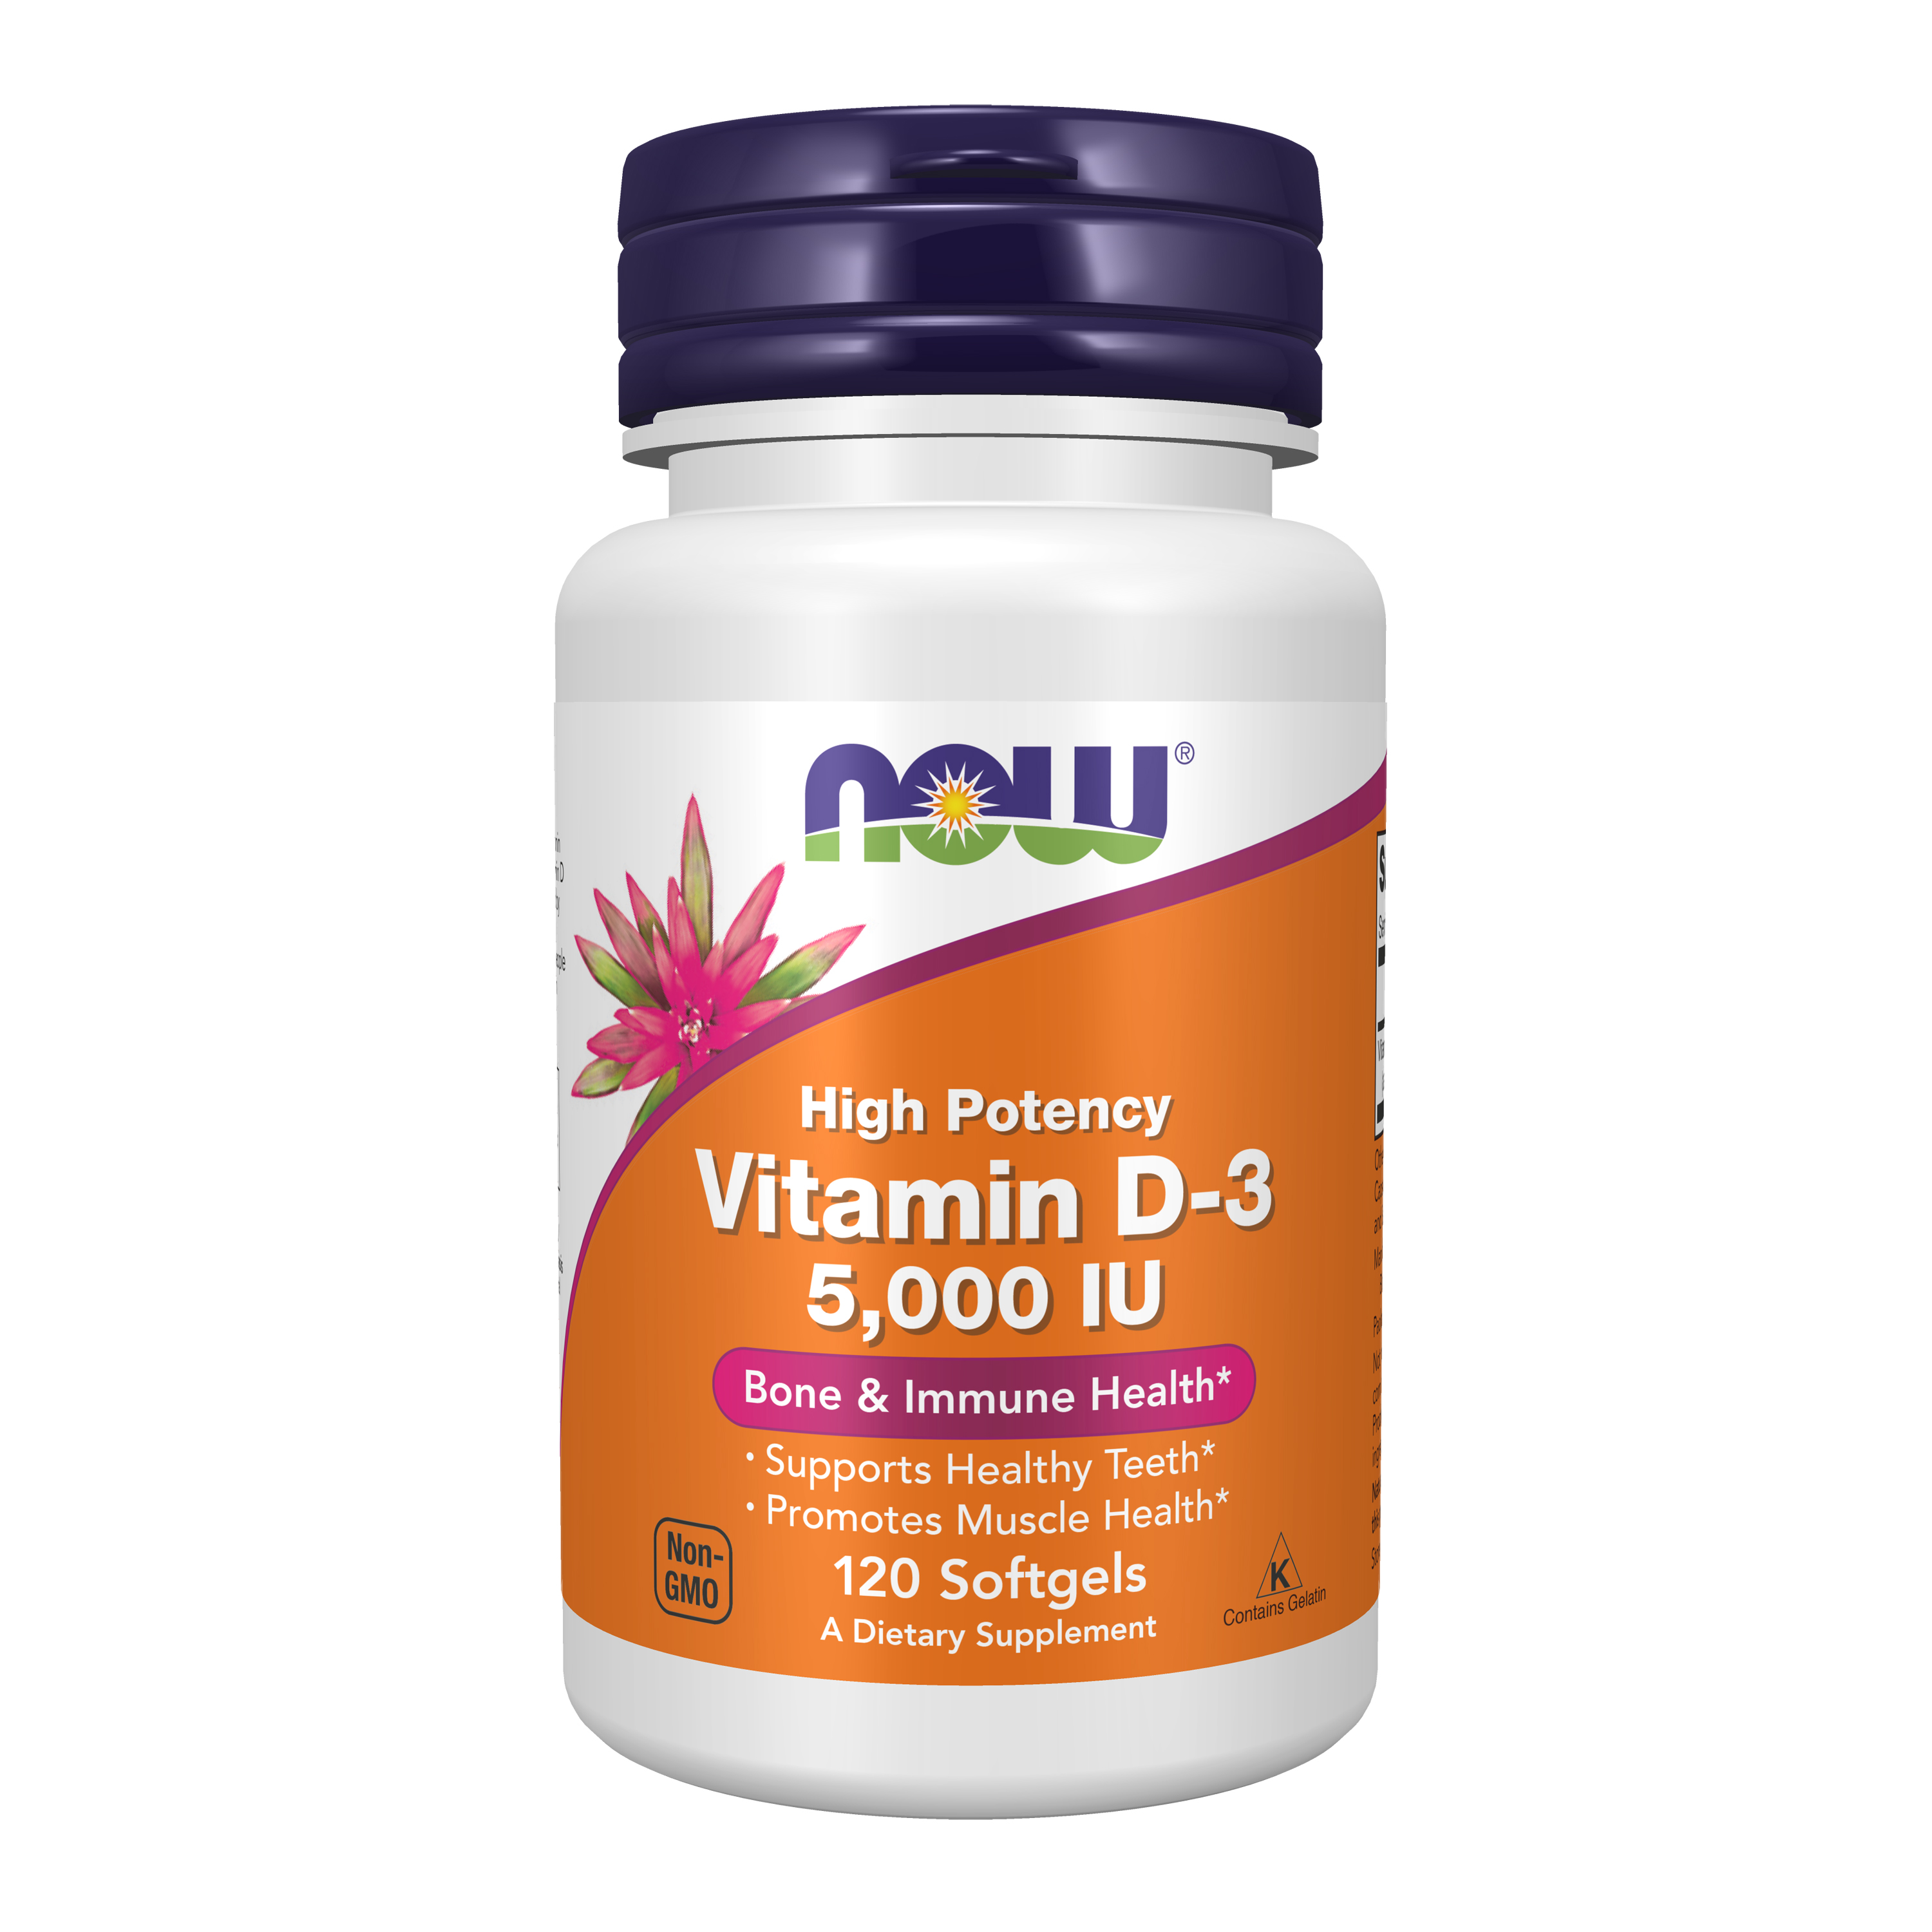 NOW Supplements, Vitamin D-3 5,000 IU, High Potency, Structural Support*, 120 Softgels - image 1 of 8